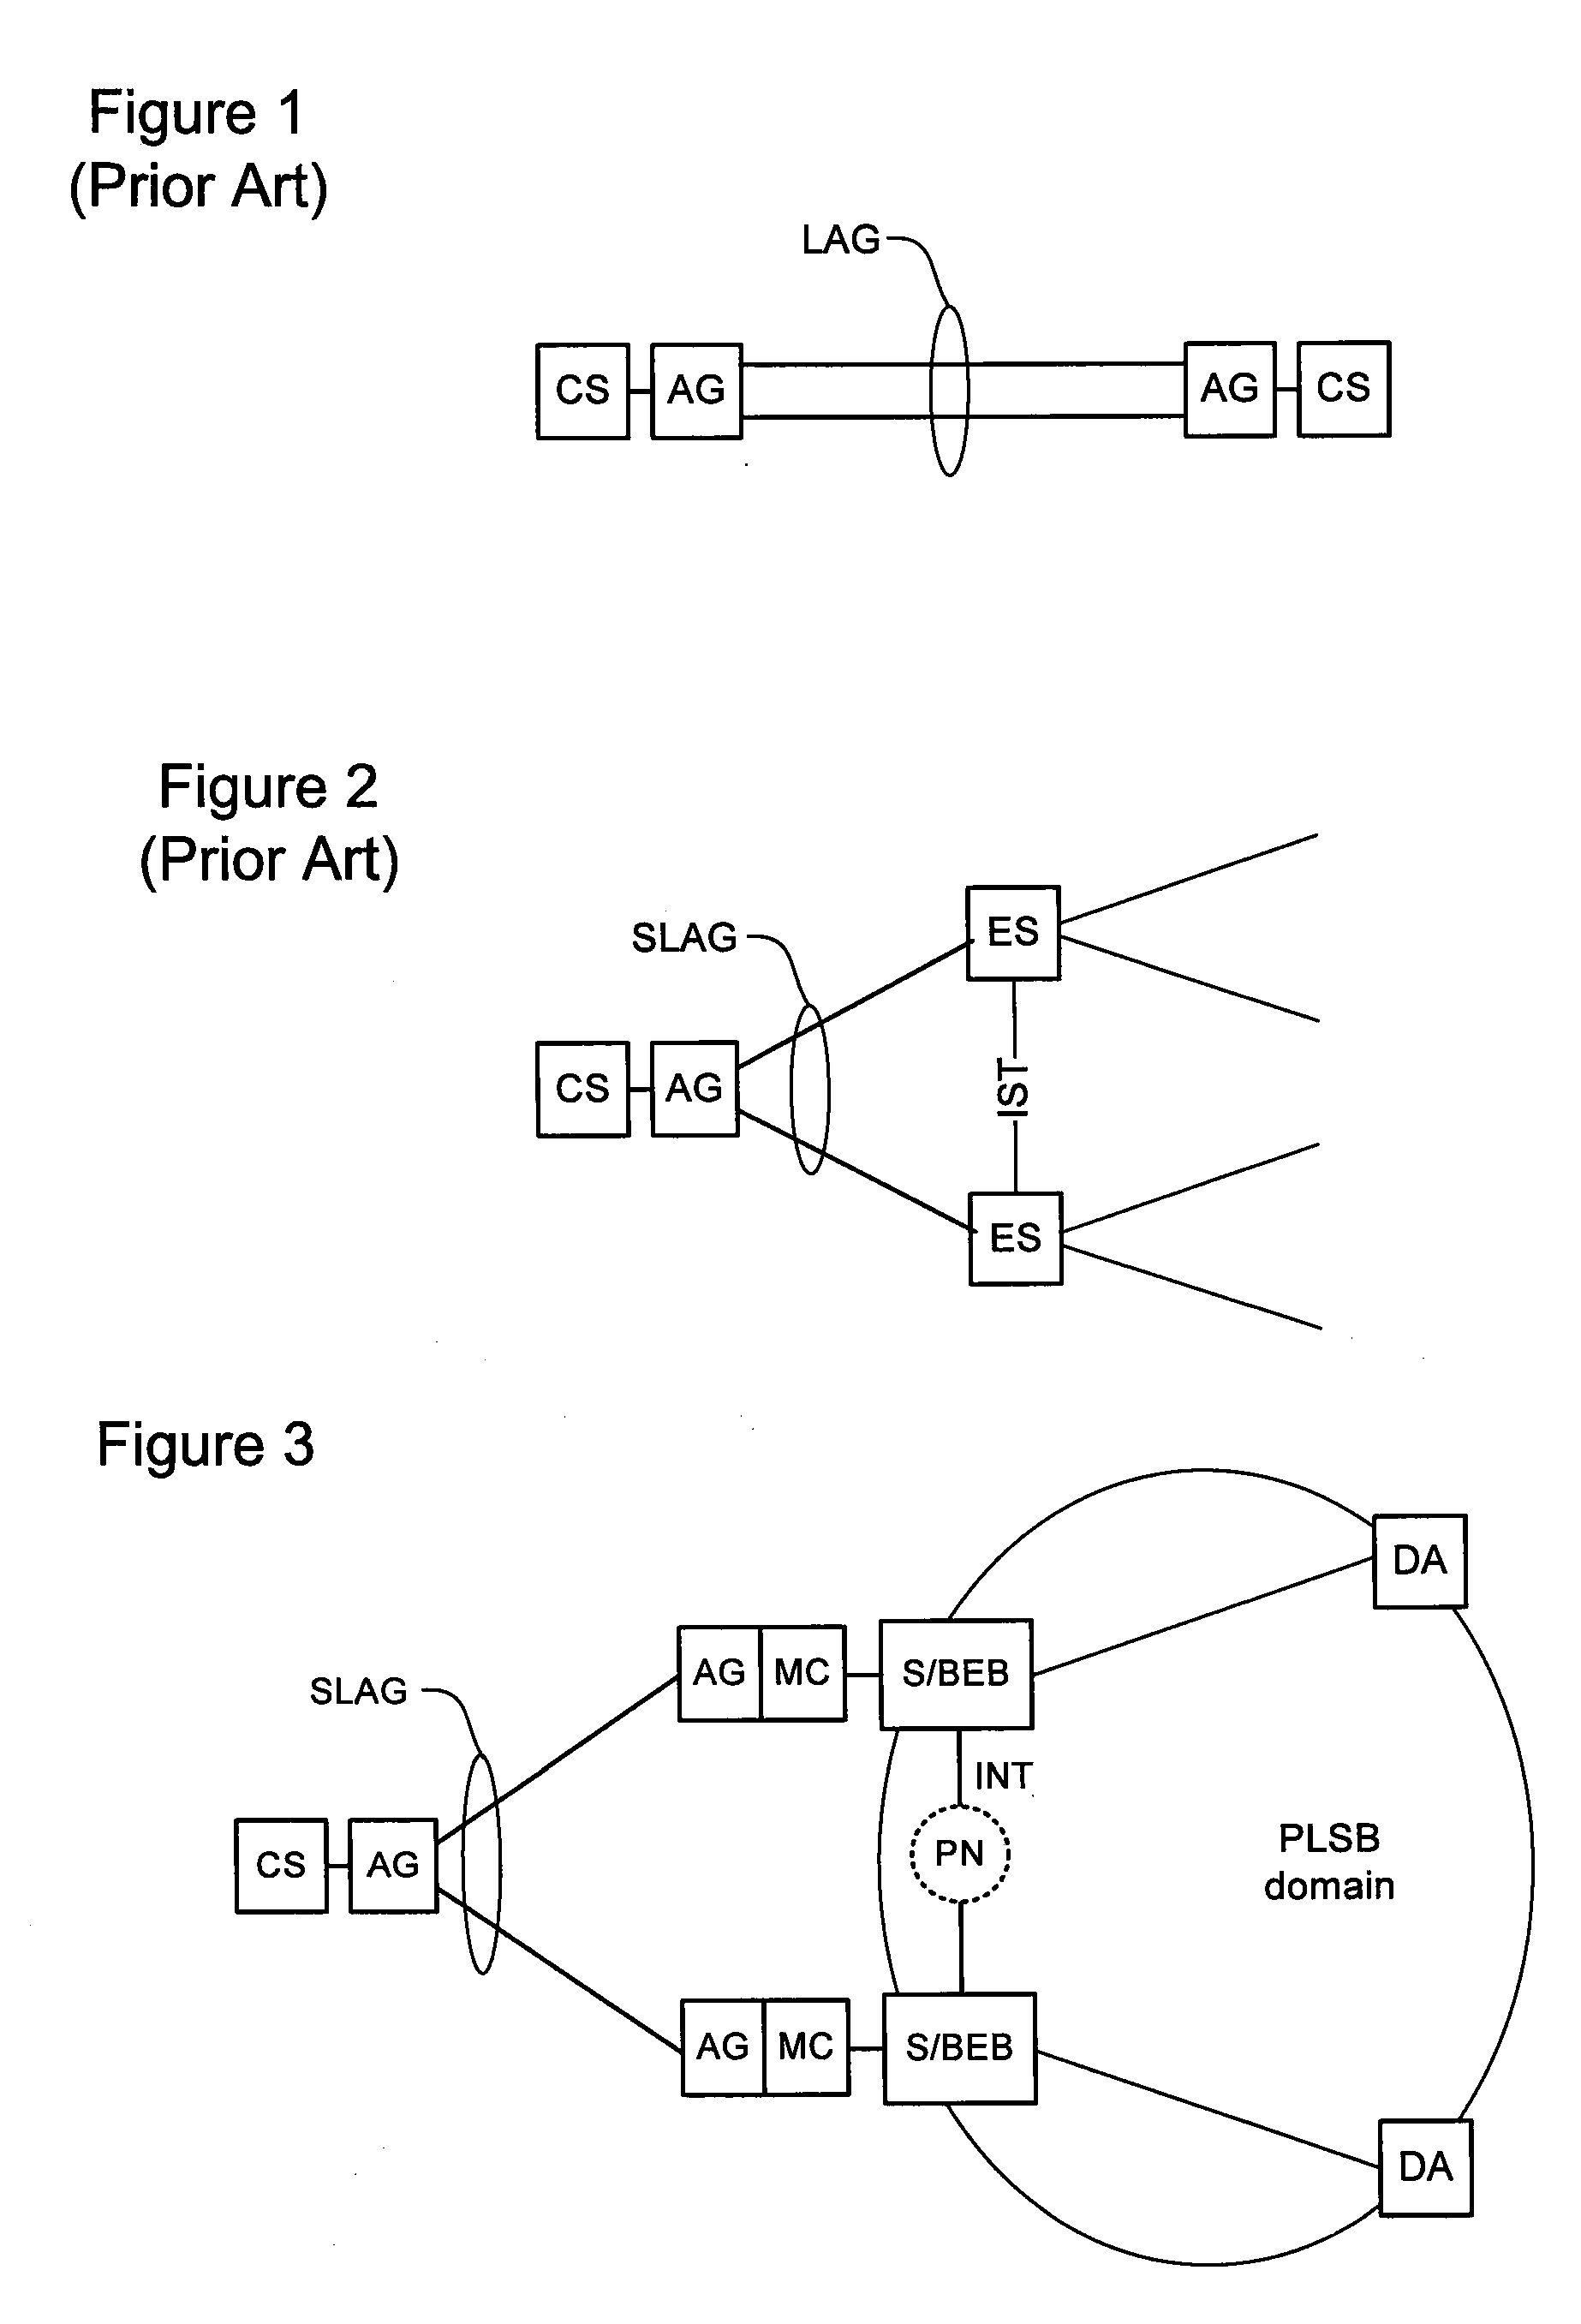 Resilient attachment to provider link state bridging (PLSB) networks